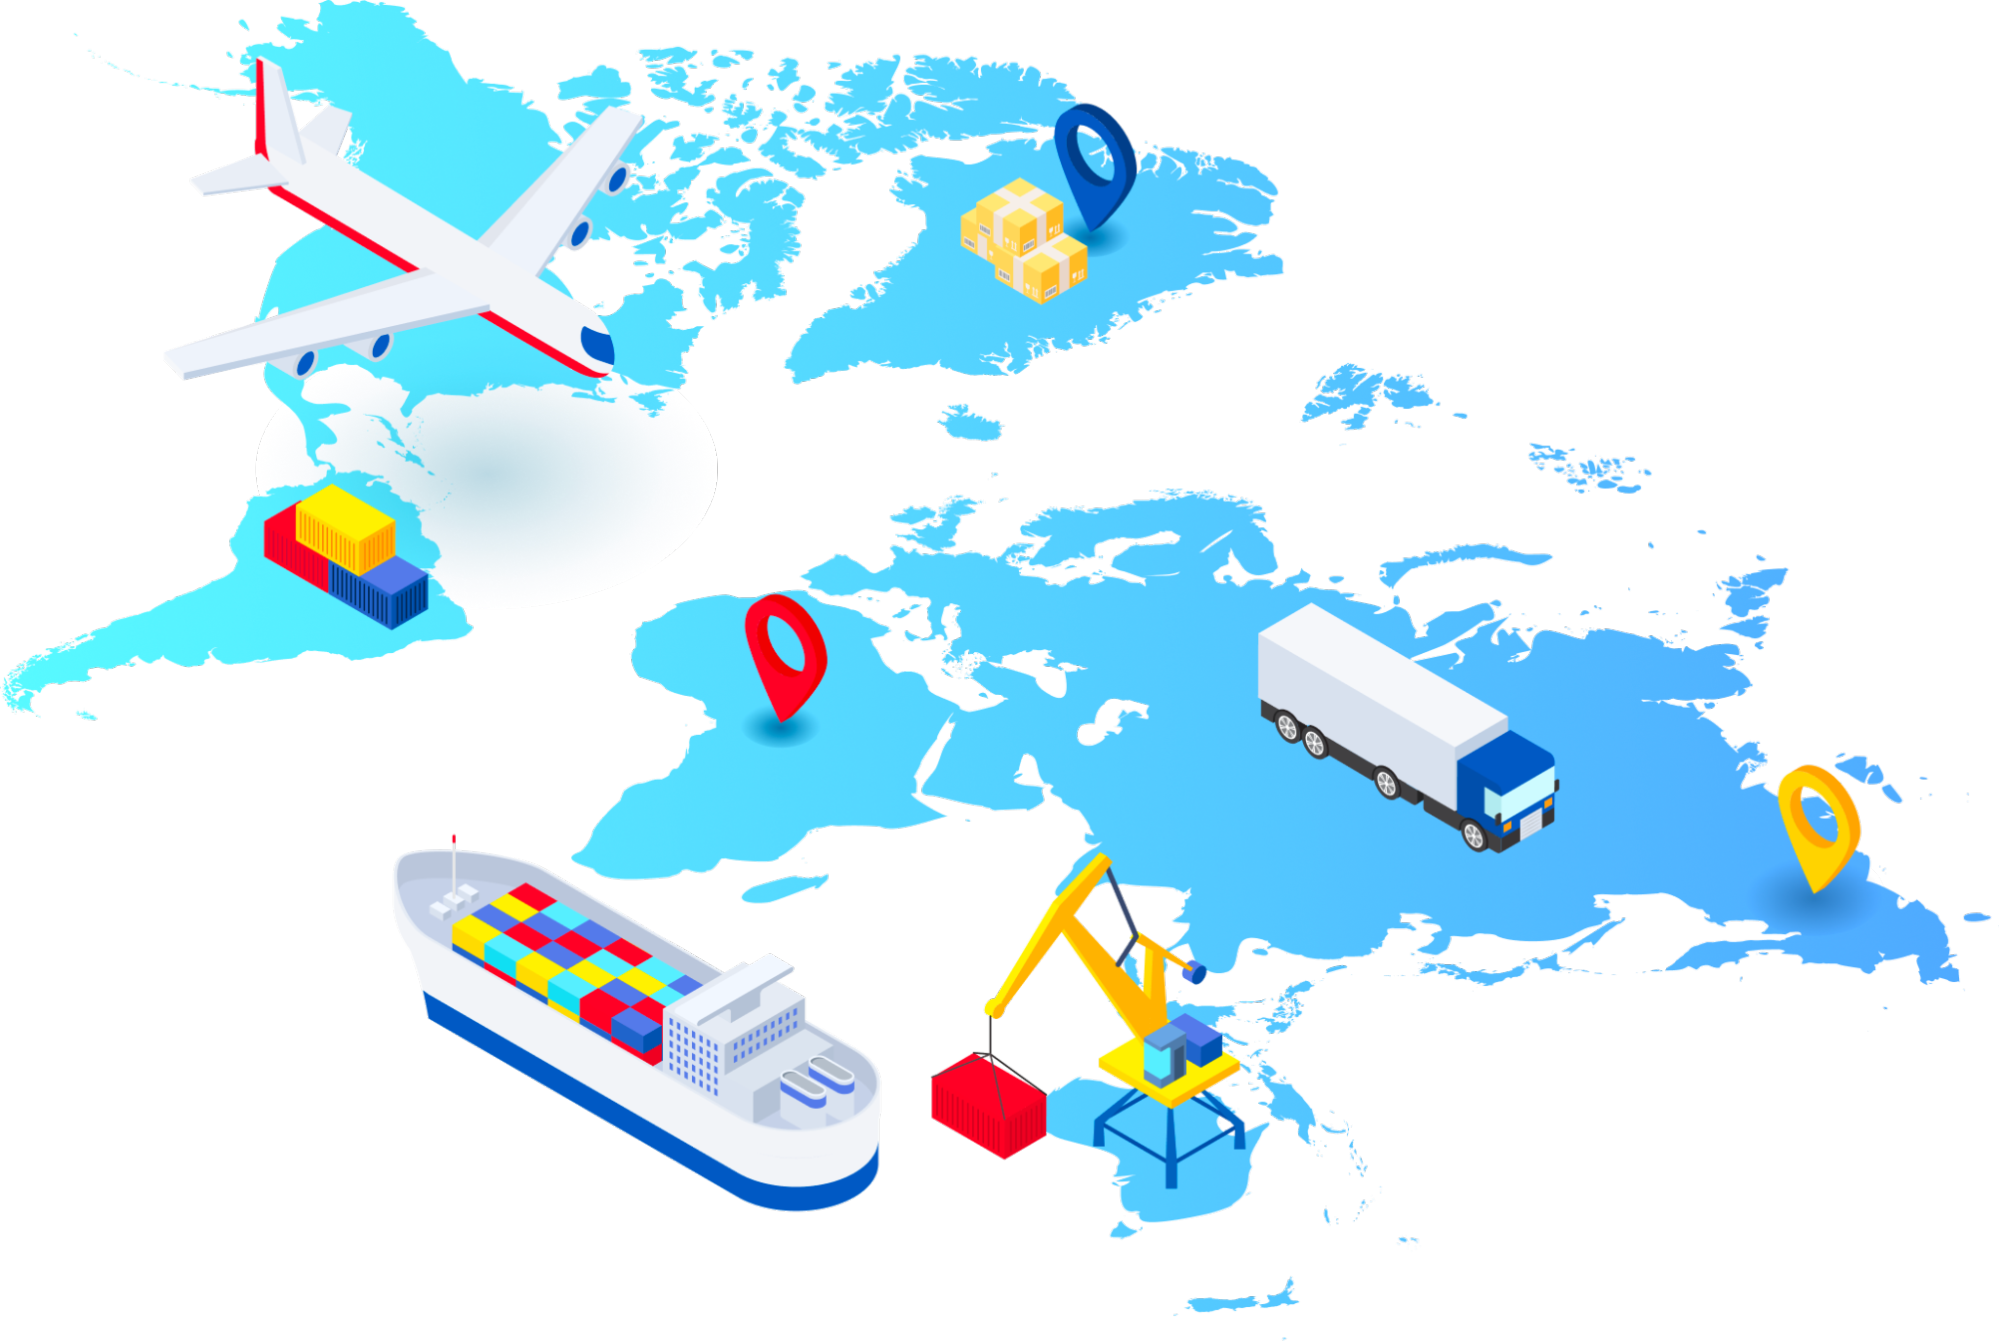 A flat map of the world with misc. supply chain partner locations marked with pins and infrastructural elements like an airplane, shipping containers in port, trucks, and tanker boats